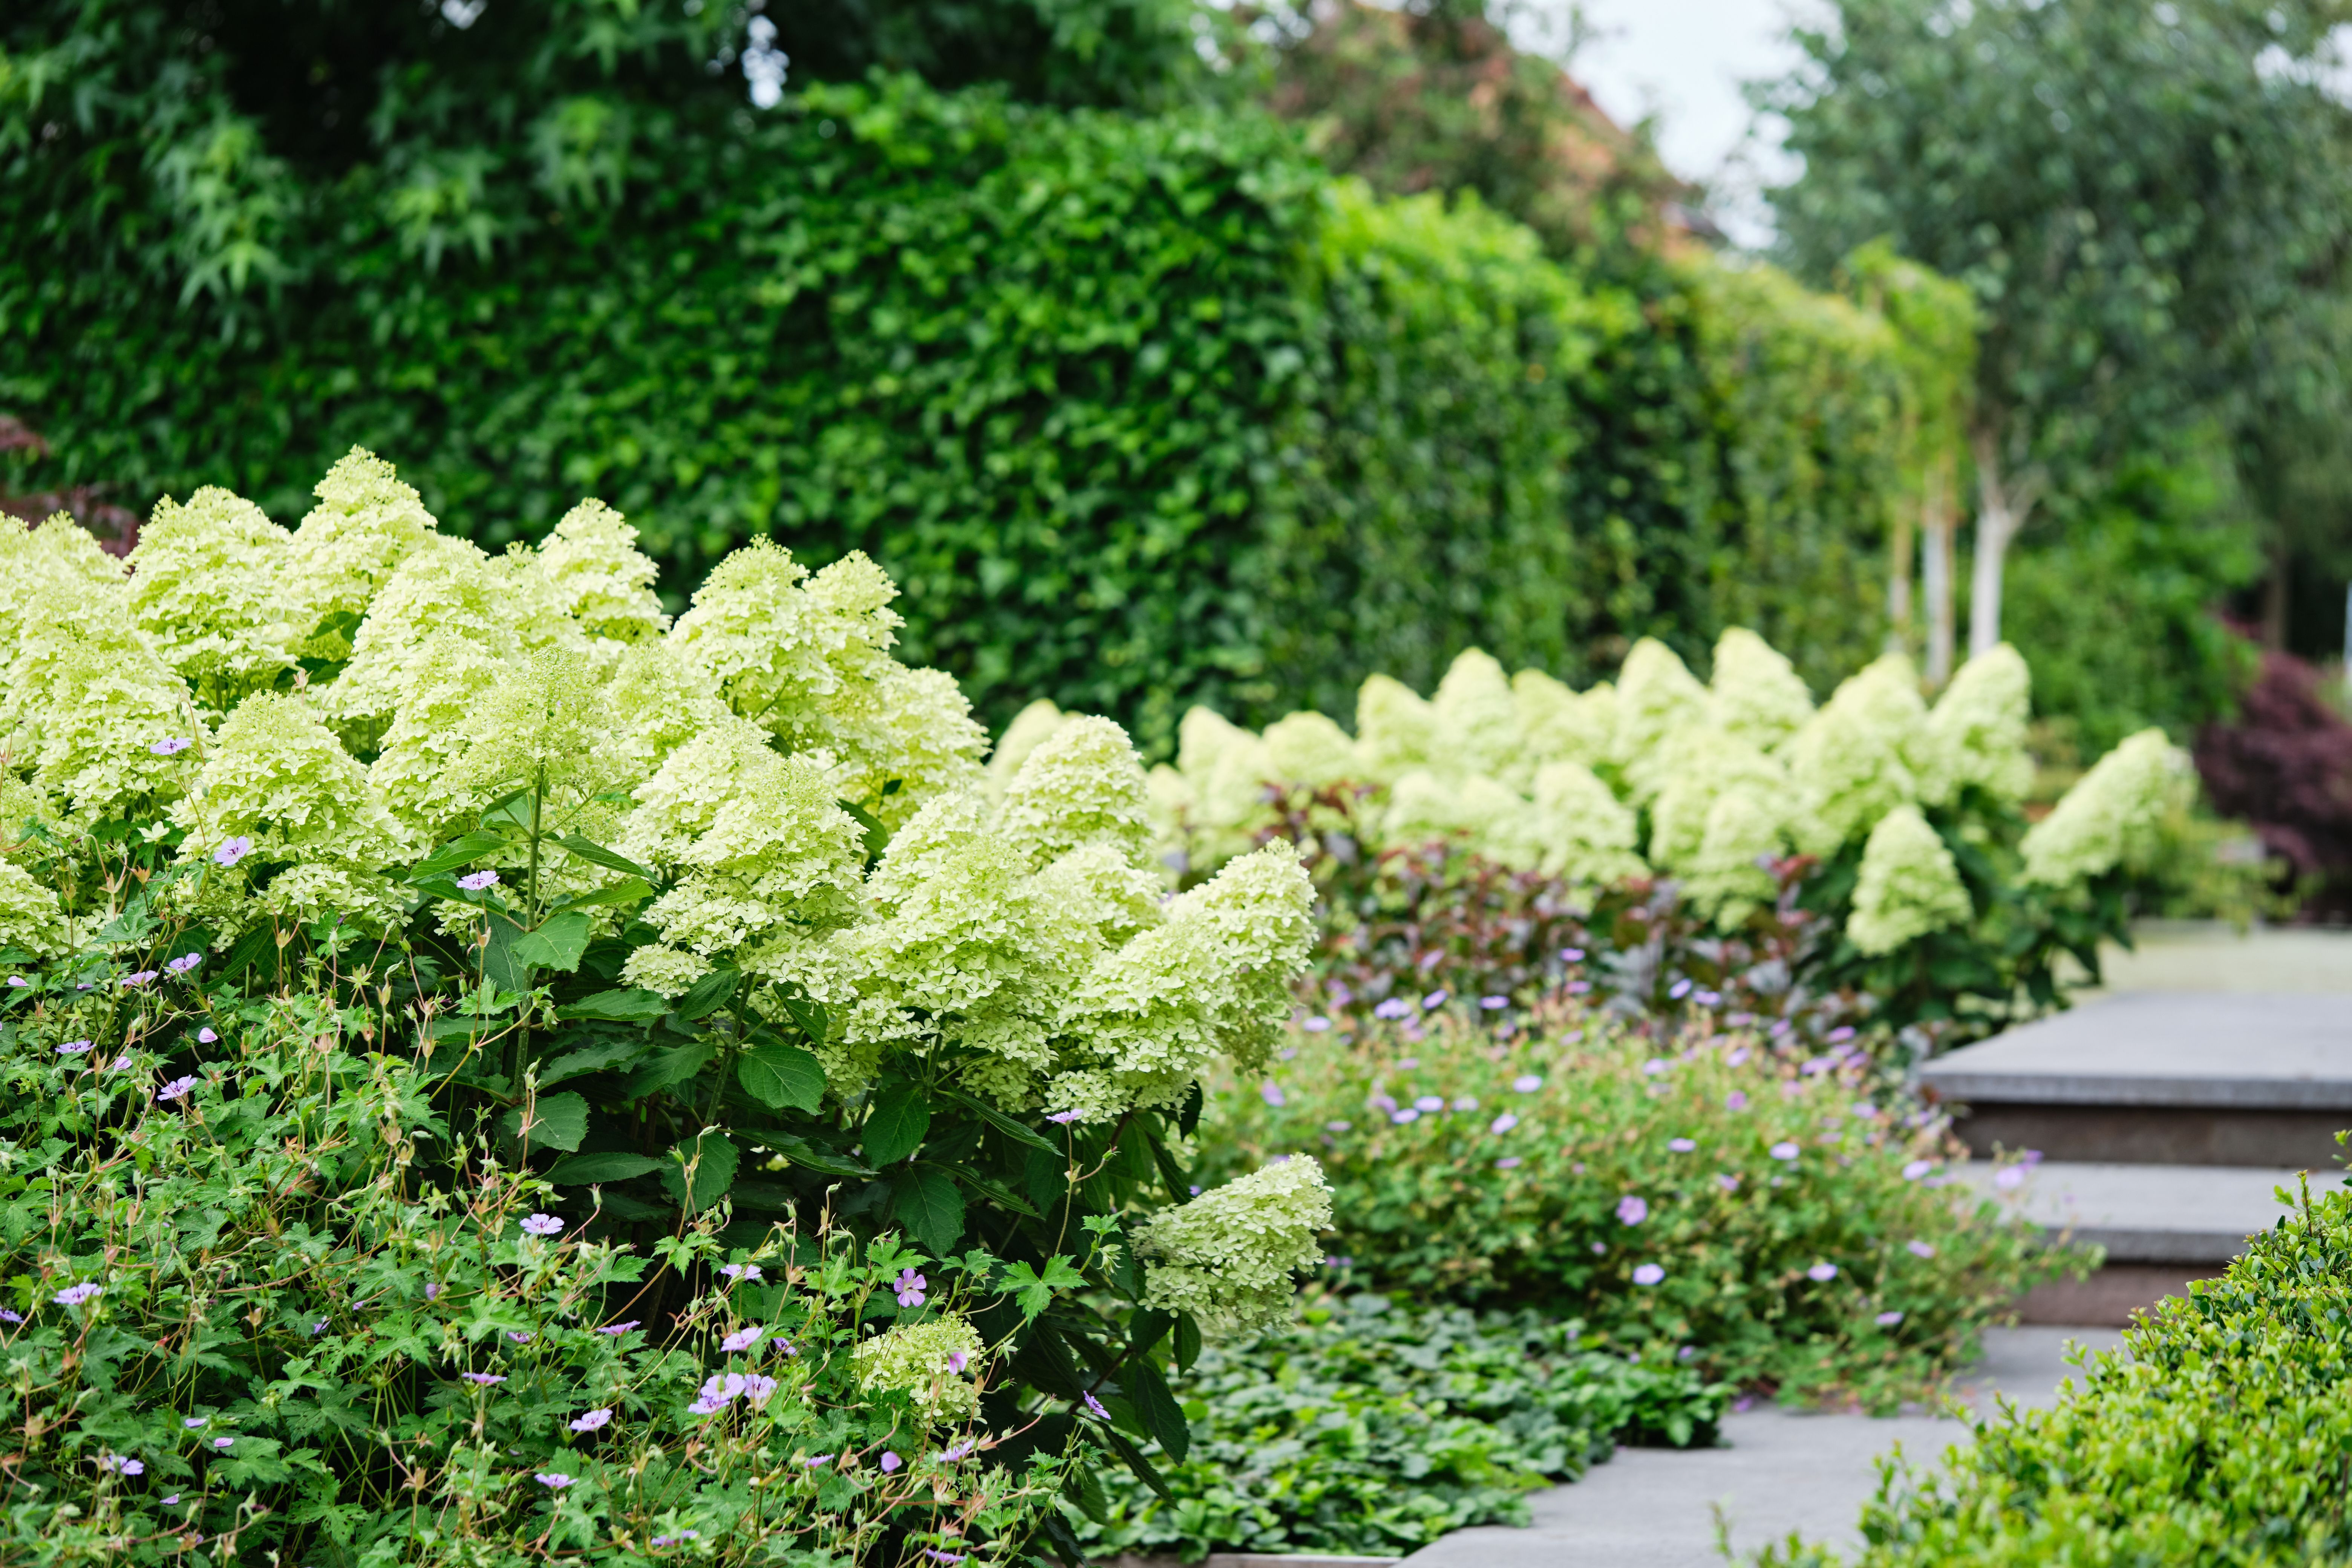 images/plants/hydrangea/hyd-magical-lime-sparkle/hyd-pan-magical-lime-sparkle-0005.jpg